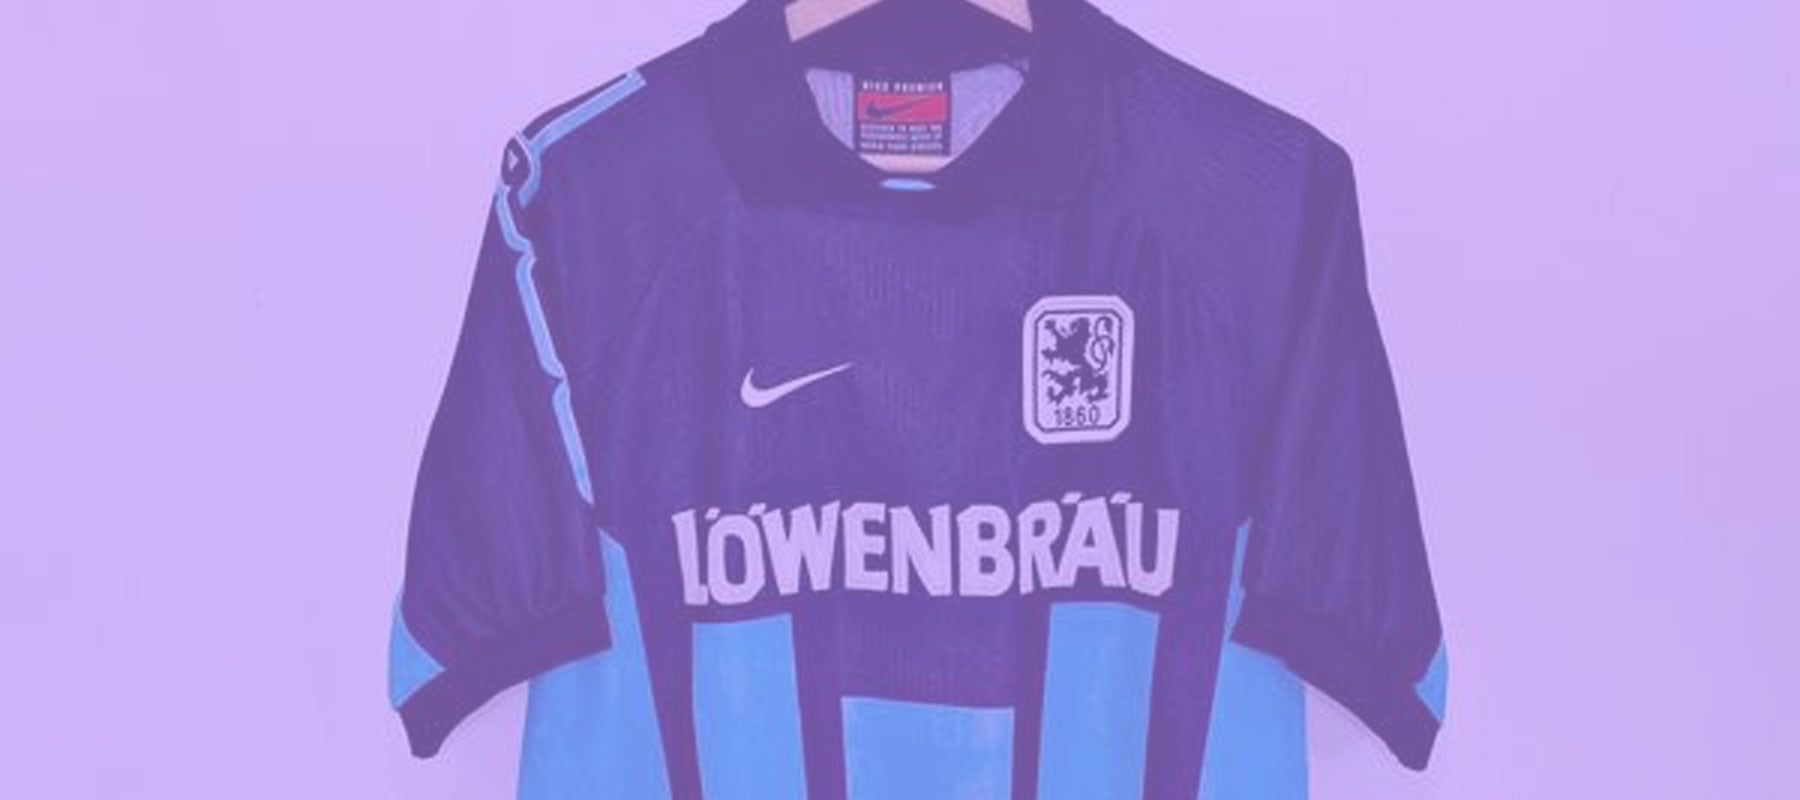 1860 Munich shirts will always be collectable